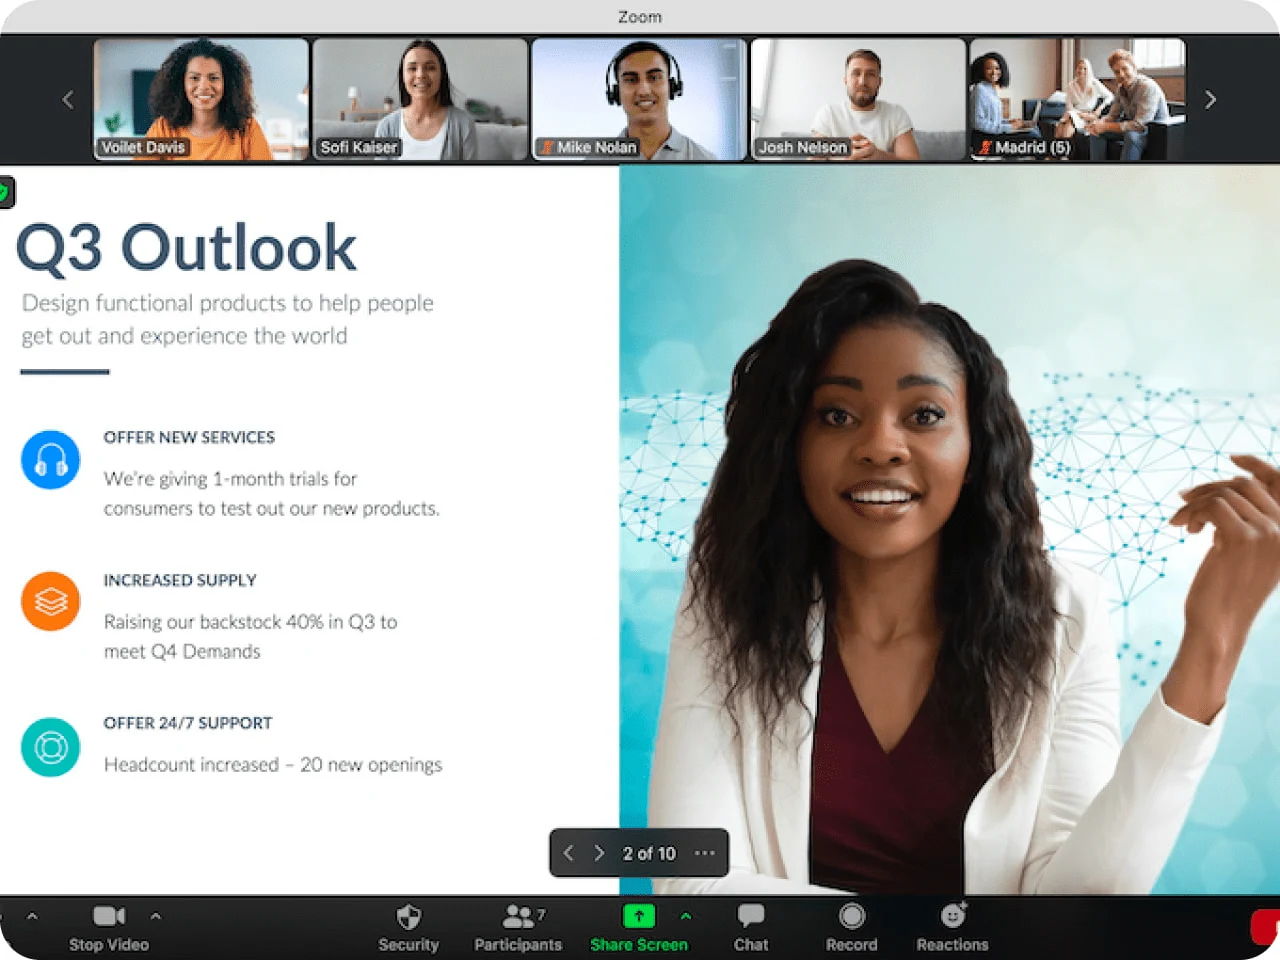 Screenshot of a Zoom meeting in which a woman is giving a presentation titled "Q3 Outlook" to teammates